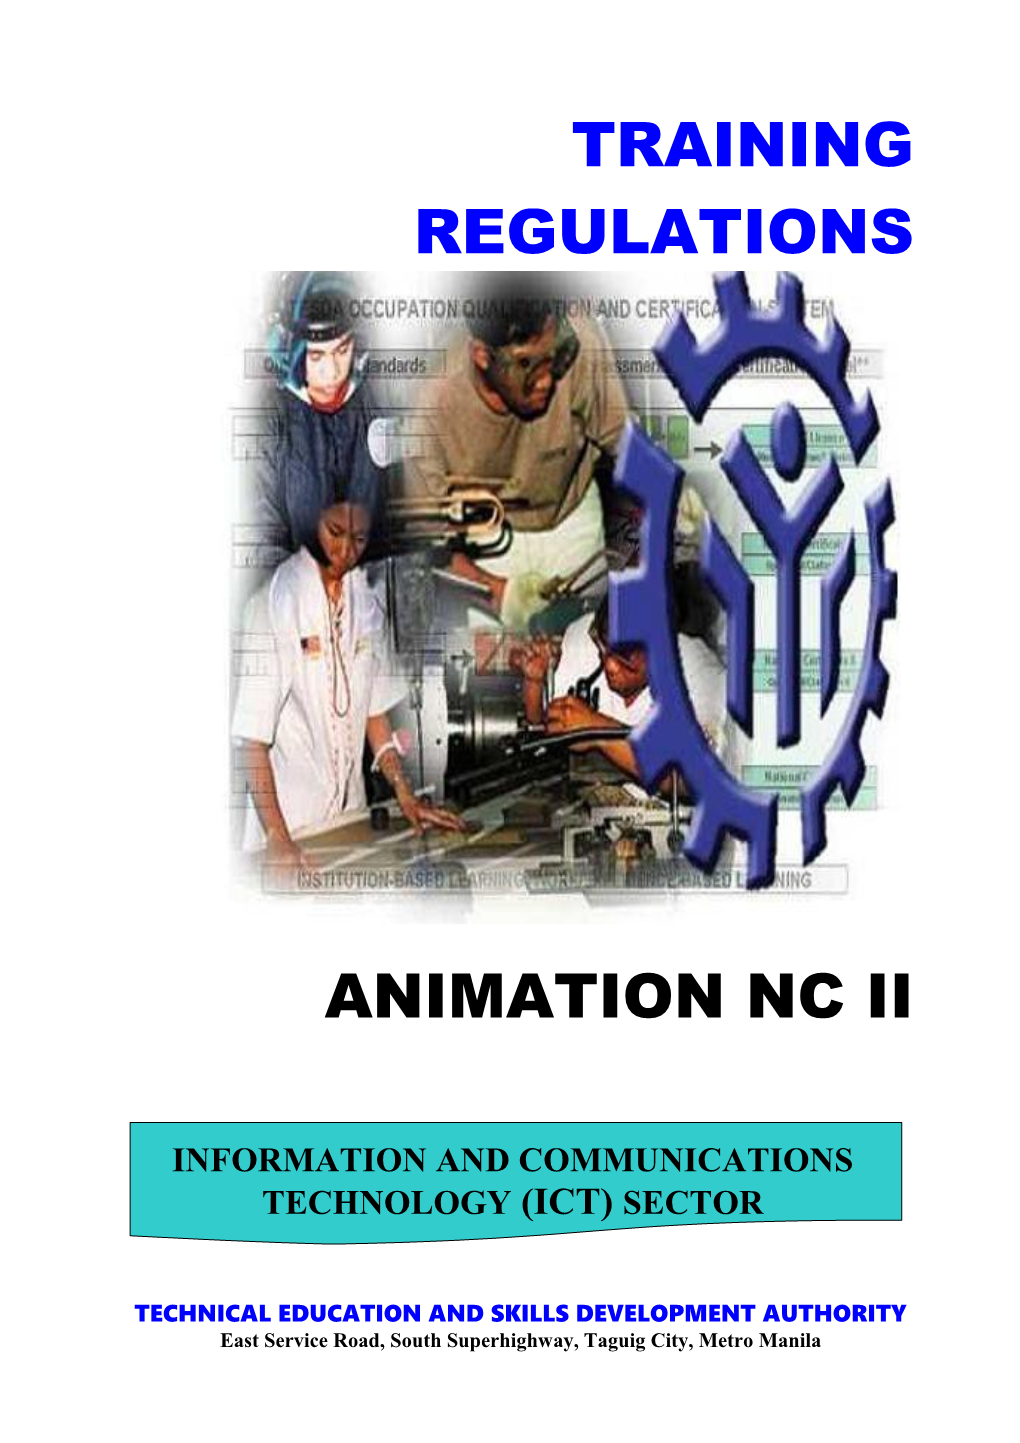 TR - ICT (2D ANIMATION NC III) Amended July 2007